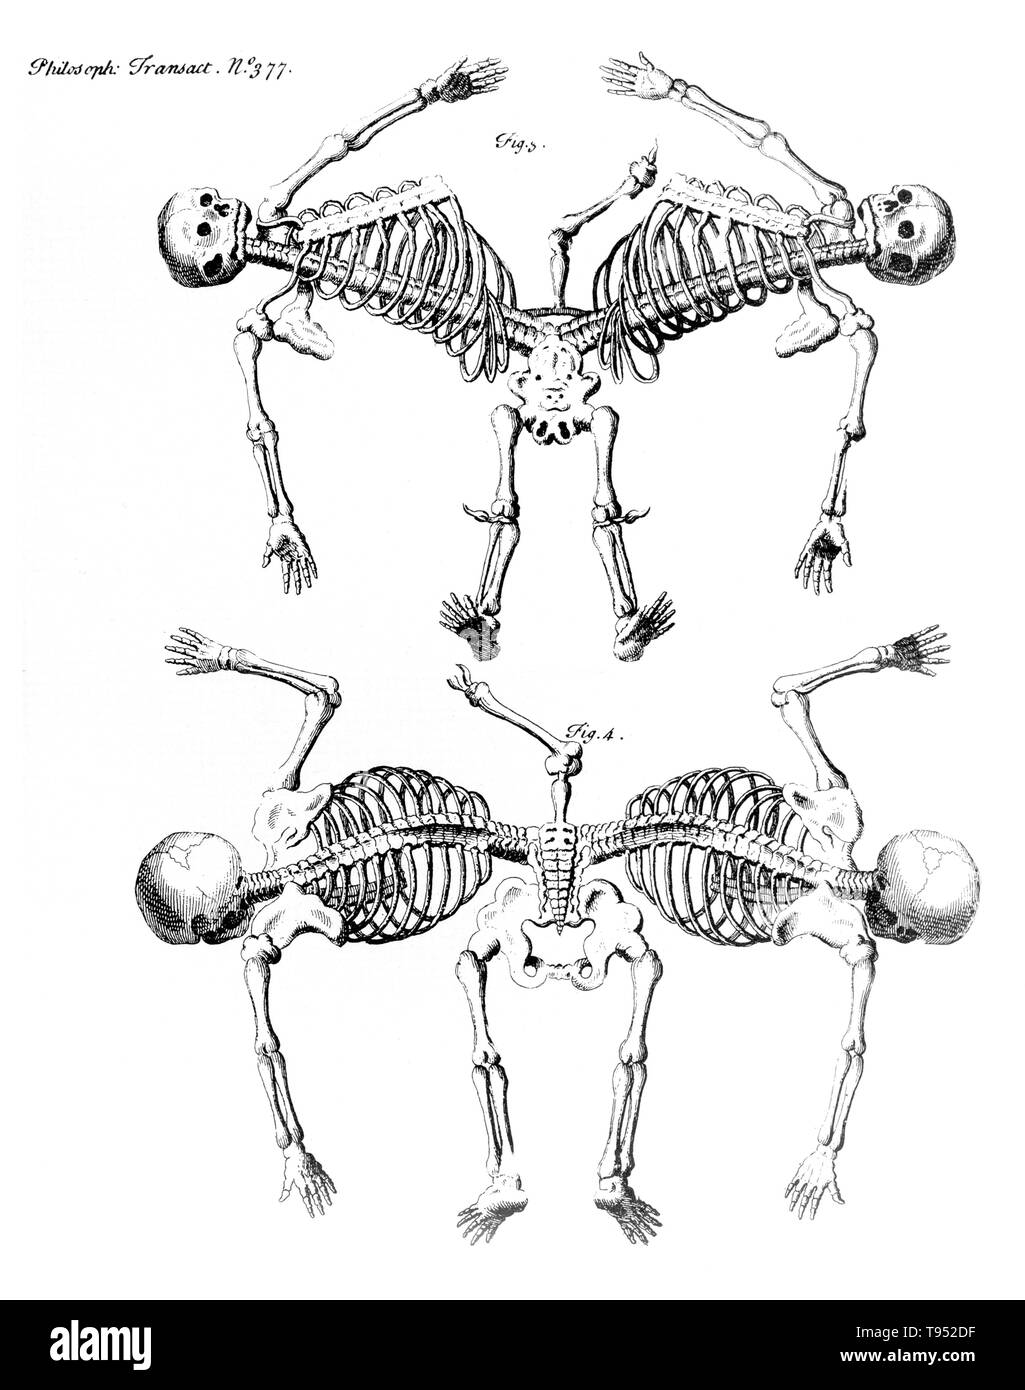 Conjoined twins are identical twins born with their bodies joined at some point and having varying degrees of residual duplication, a result of the incomplete division of the ovum from which the twins developed. Ischiopagus twins have fused lower half of the two bodies, with spines conjoined end-to-end at a 180 degree angle. These twins have four arms; two, three or four legs; and typically one external set of genitalia and anus. Image appeared in 'Philosophical transactions', Volume 31-32 Number 377, Firgure 3 & 4, published 1720-23. Stock Photo